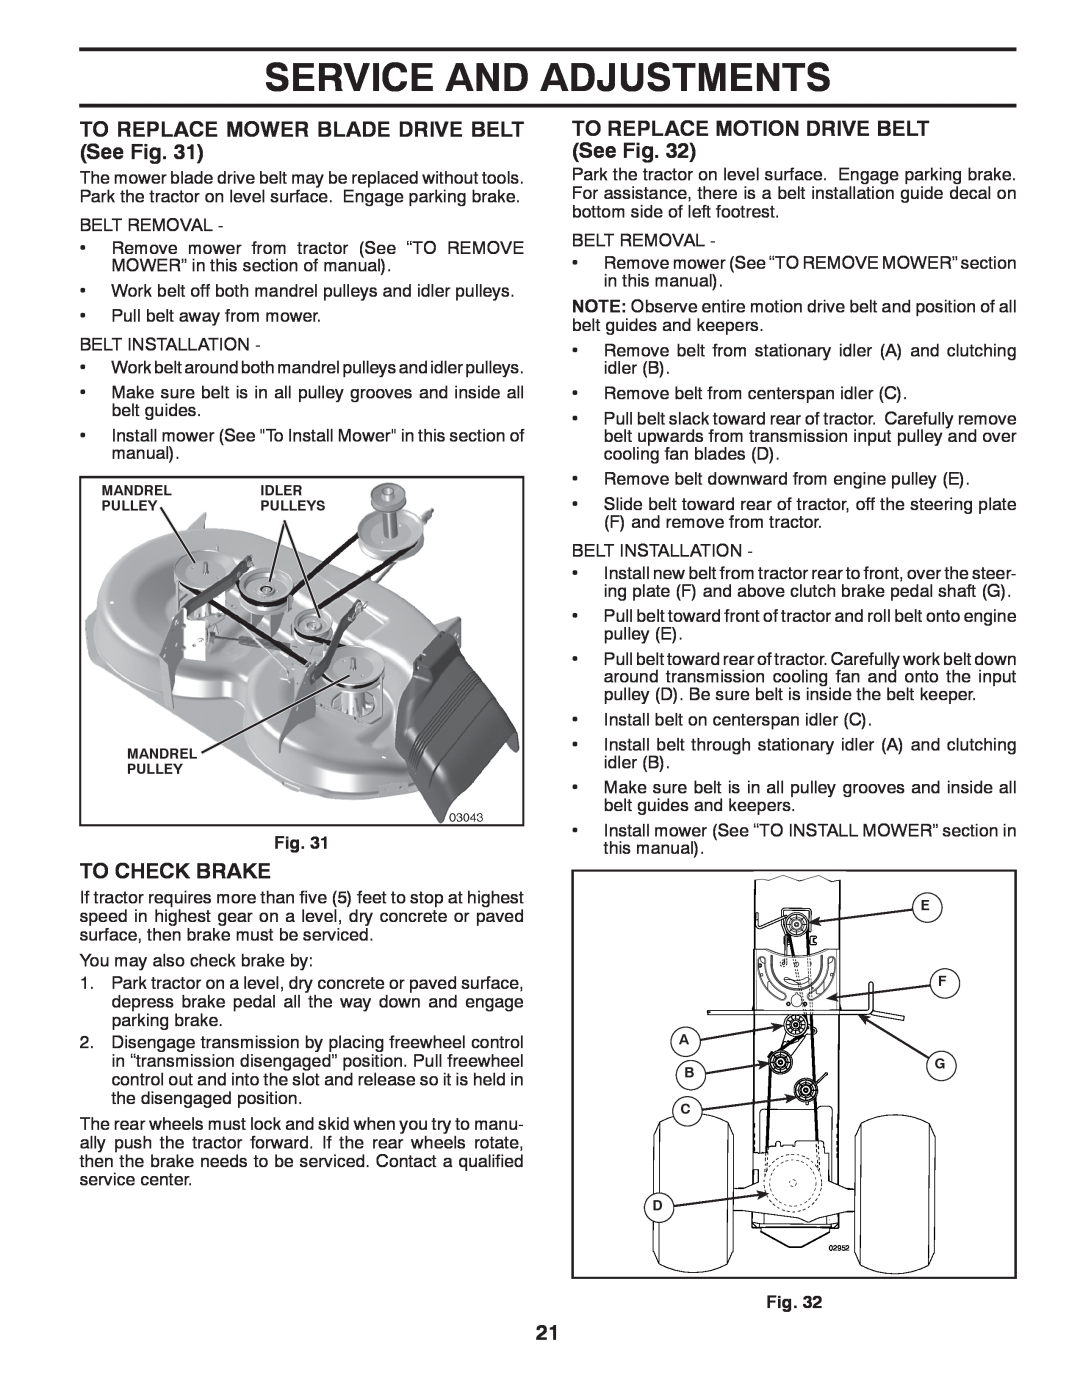 Poulan 419756, 96042007200 manual Service And Adjustments, TO REPLACE MOWER BLADE DRIVE BELT See Fig, To Check Brake 